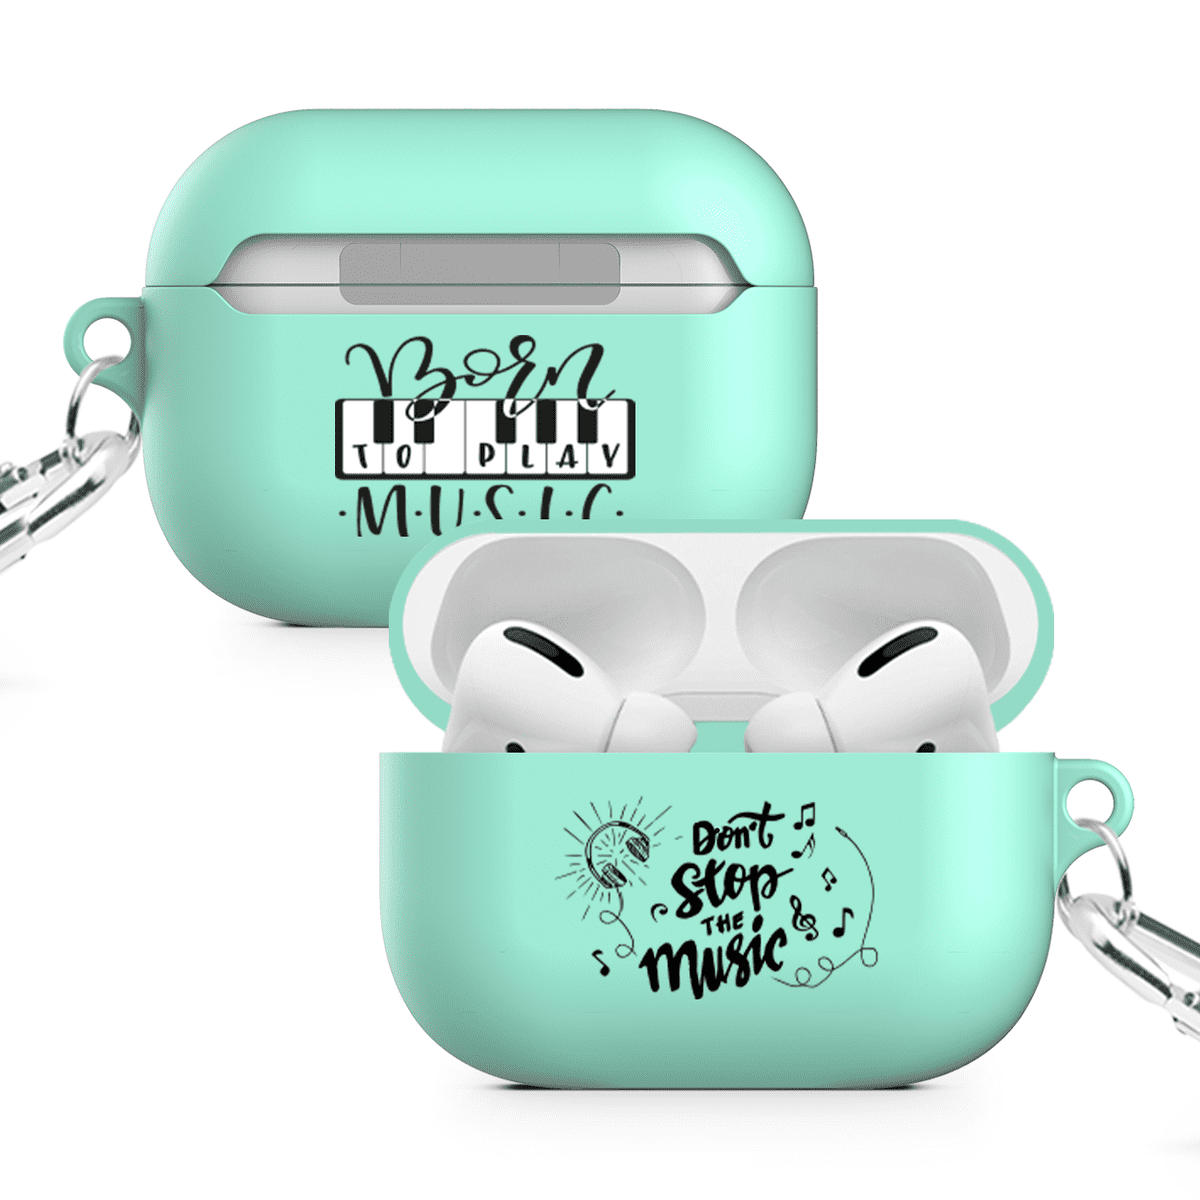 Custom Personalized Airpods Case for 1/2 Gen / Pro Airpods 1/2-Qstomize.com